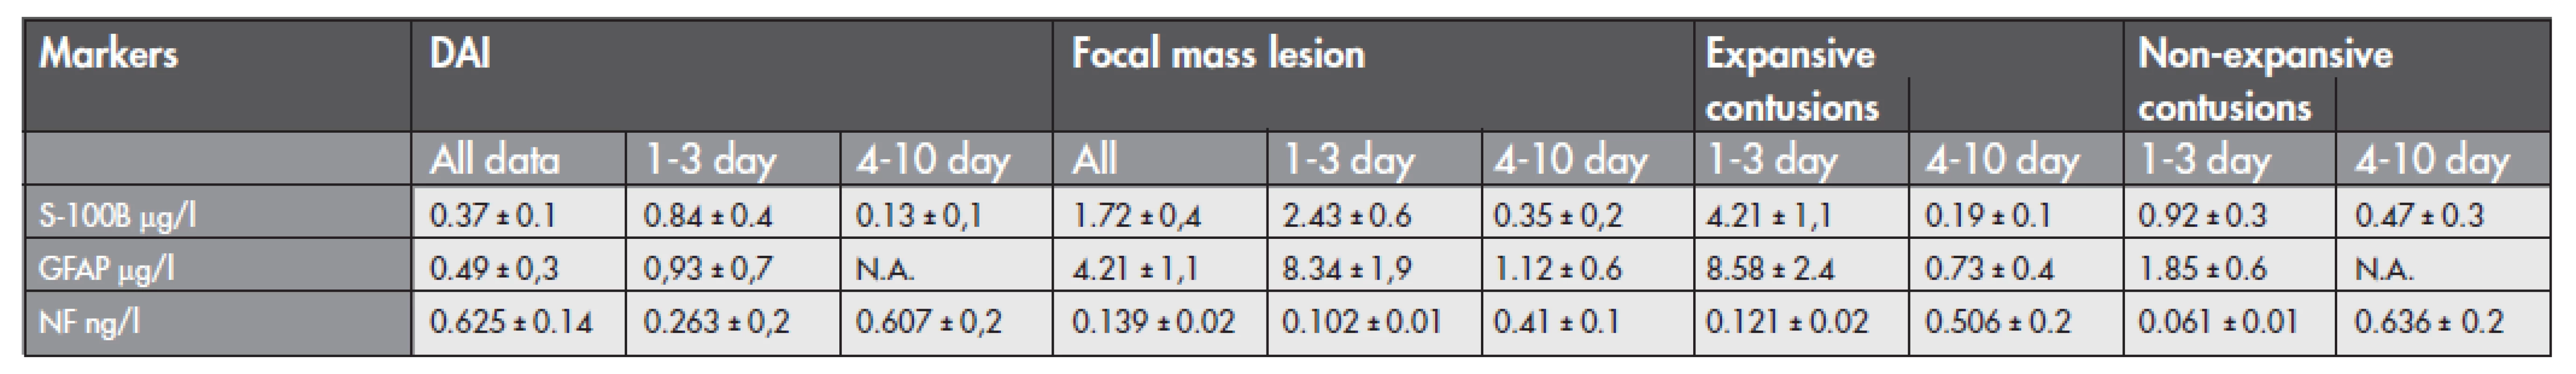 Data of diffuse and focal brain injuries with respect to the time-profiling (1–3 days, 4–10 days) during 10 days after admission to the hospital (mean ±SD, μg/l for S-100B and GFAP, ng/l for NF). N.A. not available data. Time-profille kinetics of S-100B and GFAP showed a decrease in values within 10 days, and an NF-H value increase from the 1st up to 10th day. The highest  values of S-100B and GFAP were found in expansive contusions.